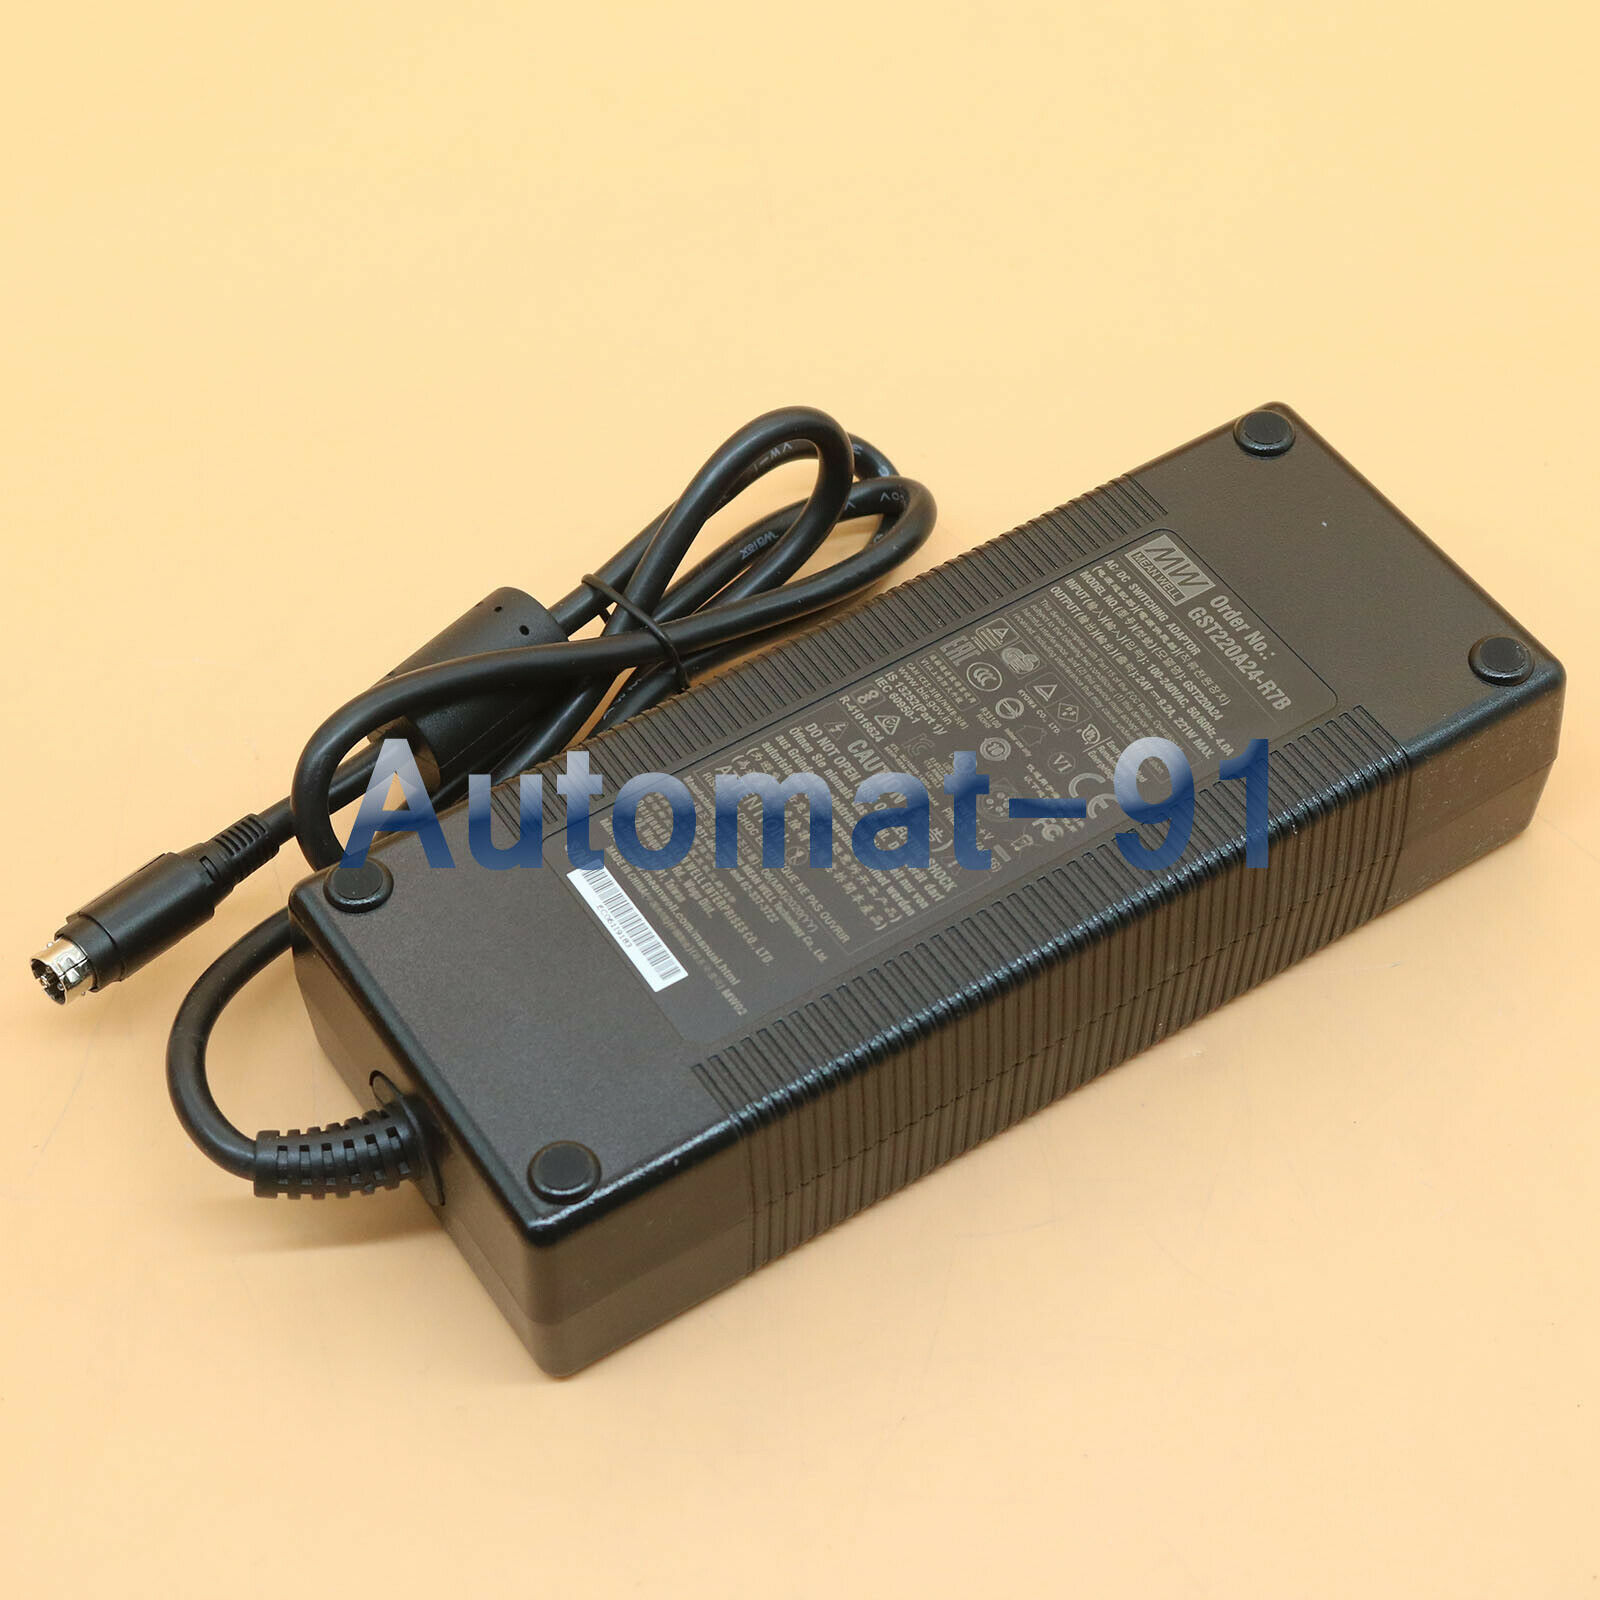 1PCS NEW Mean Well Power Supply GST220A24-R7B Model: GST220A24-R7B MPN: GST220A24-R7B Brand: Mean Well 1PCS NEW Me - Click Image to Close